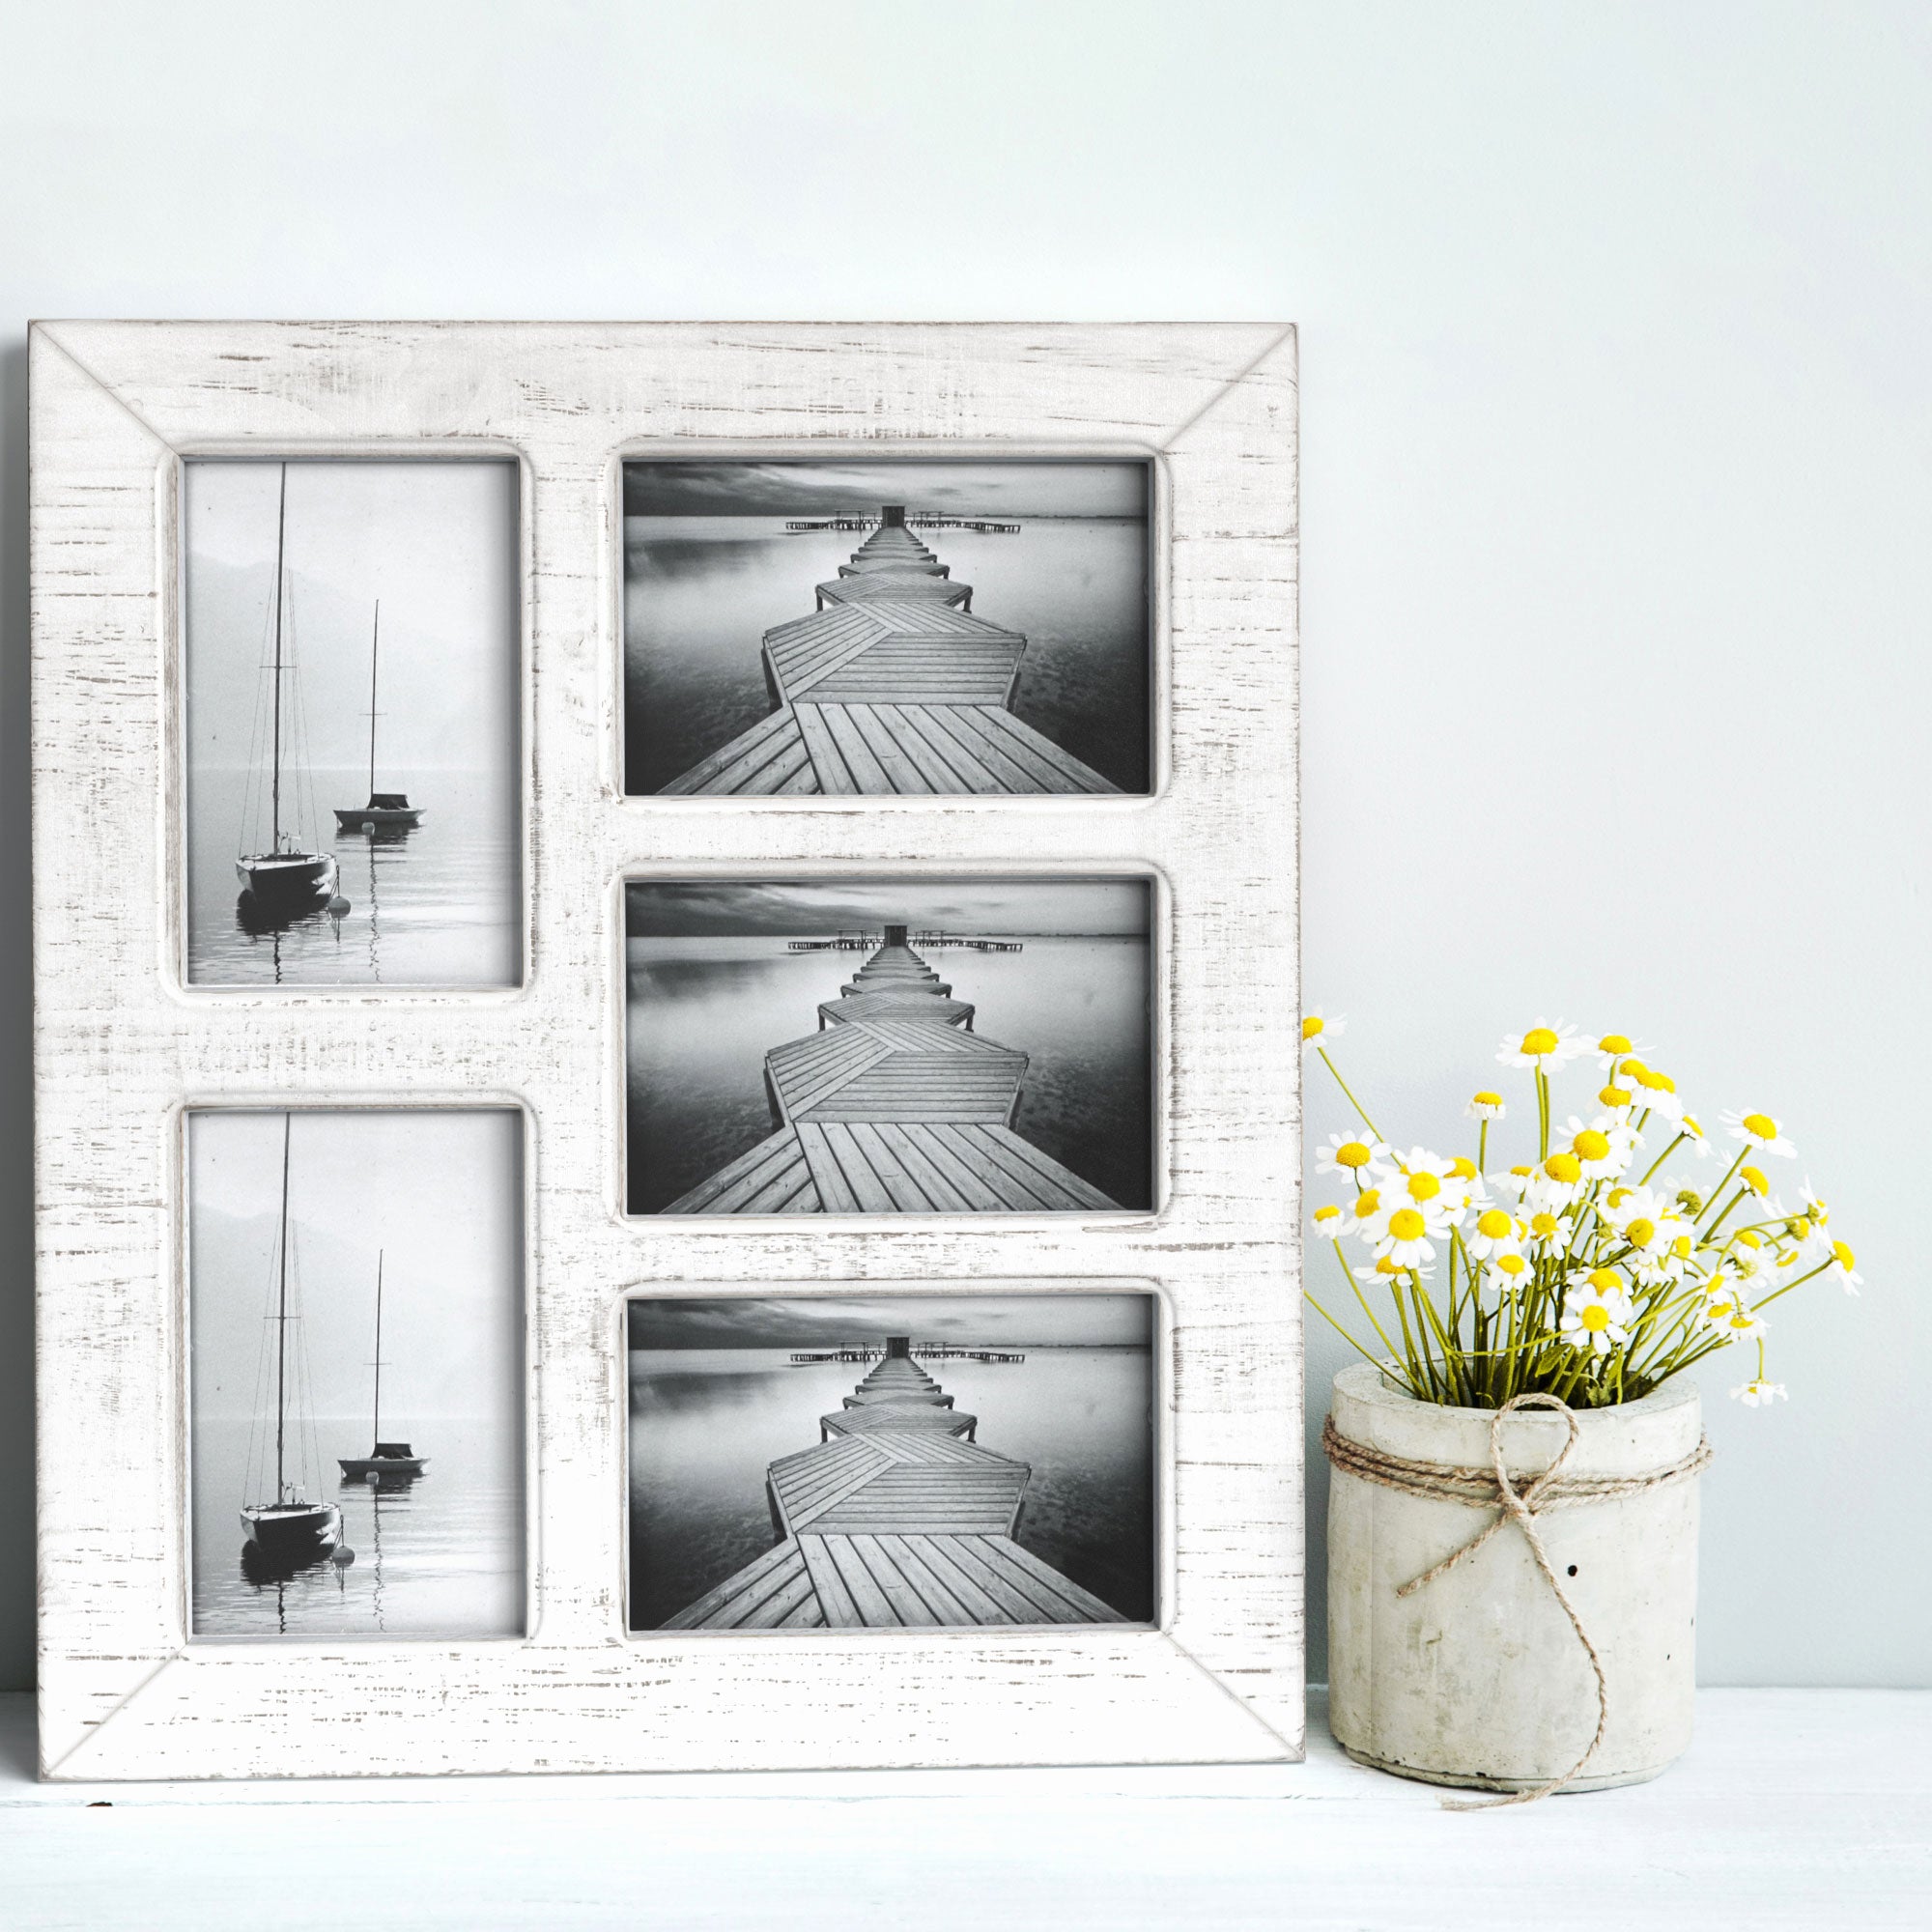 Rustic collage frame 7 opening picture frame collage 7 4x6 frame 7 5x7  frame window pane frame name sign frame distressed frames